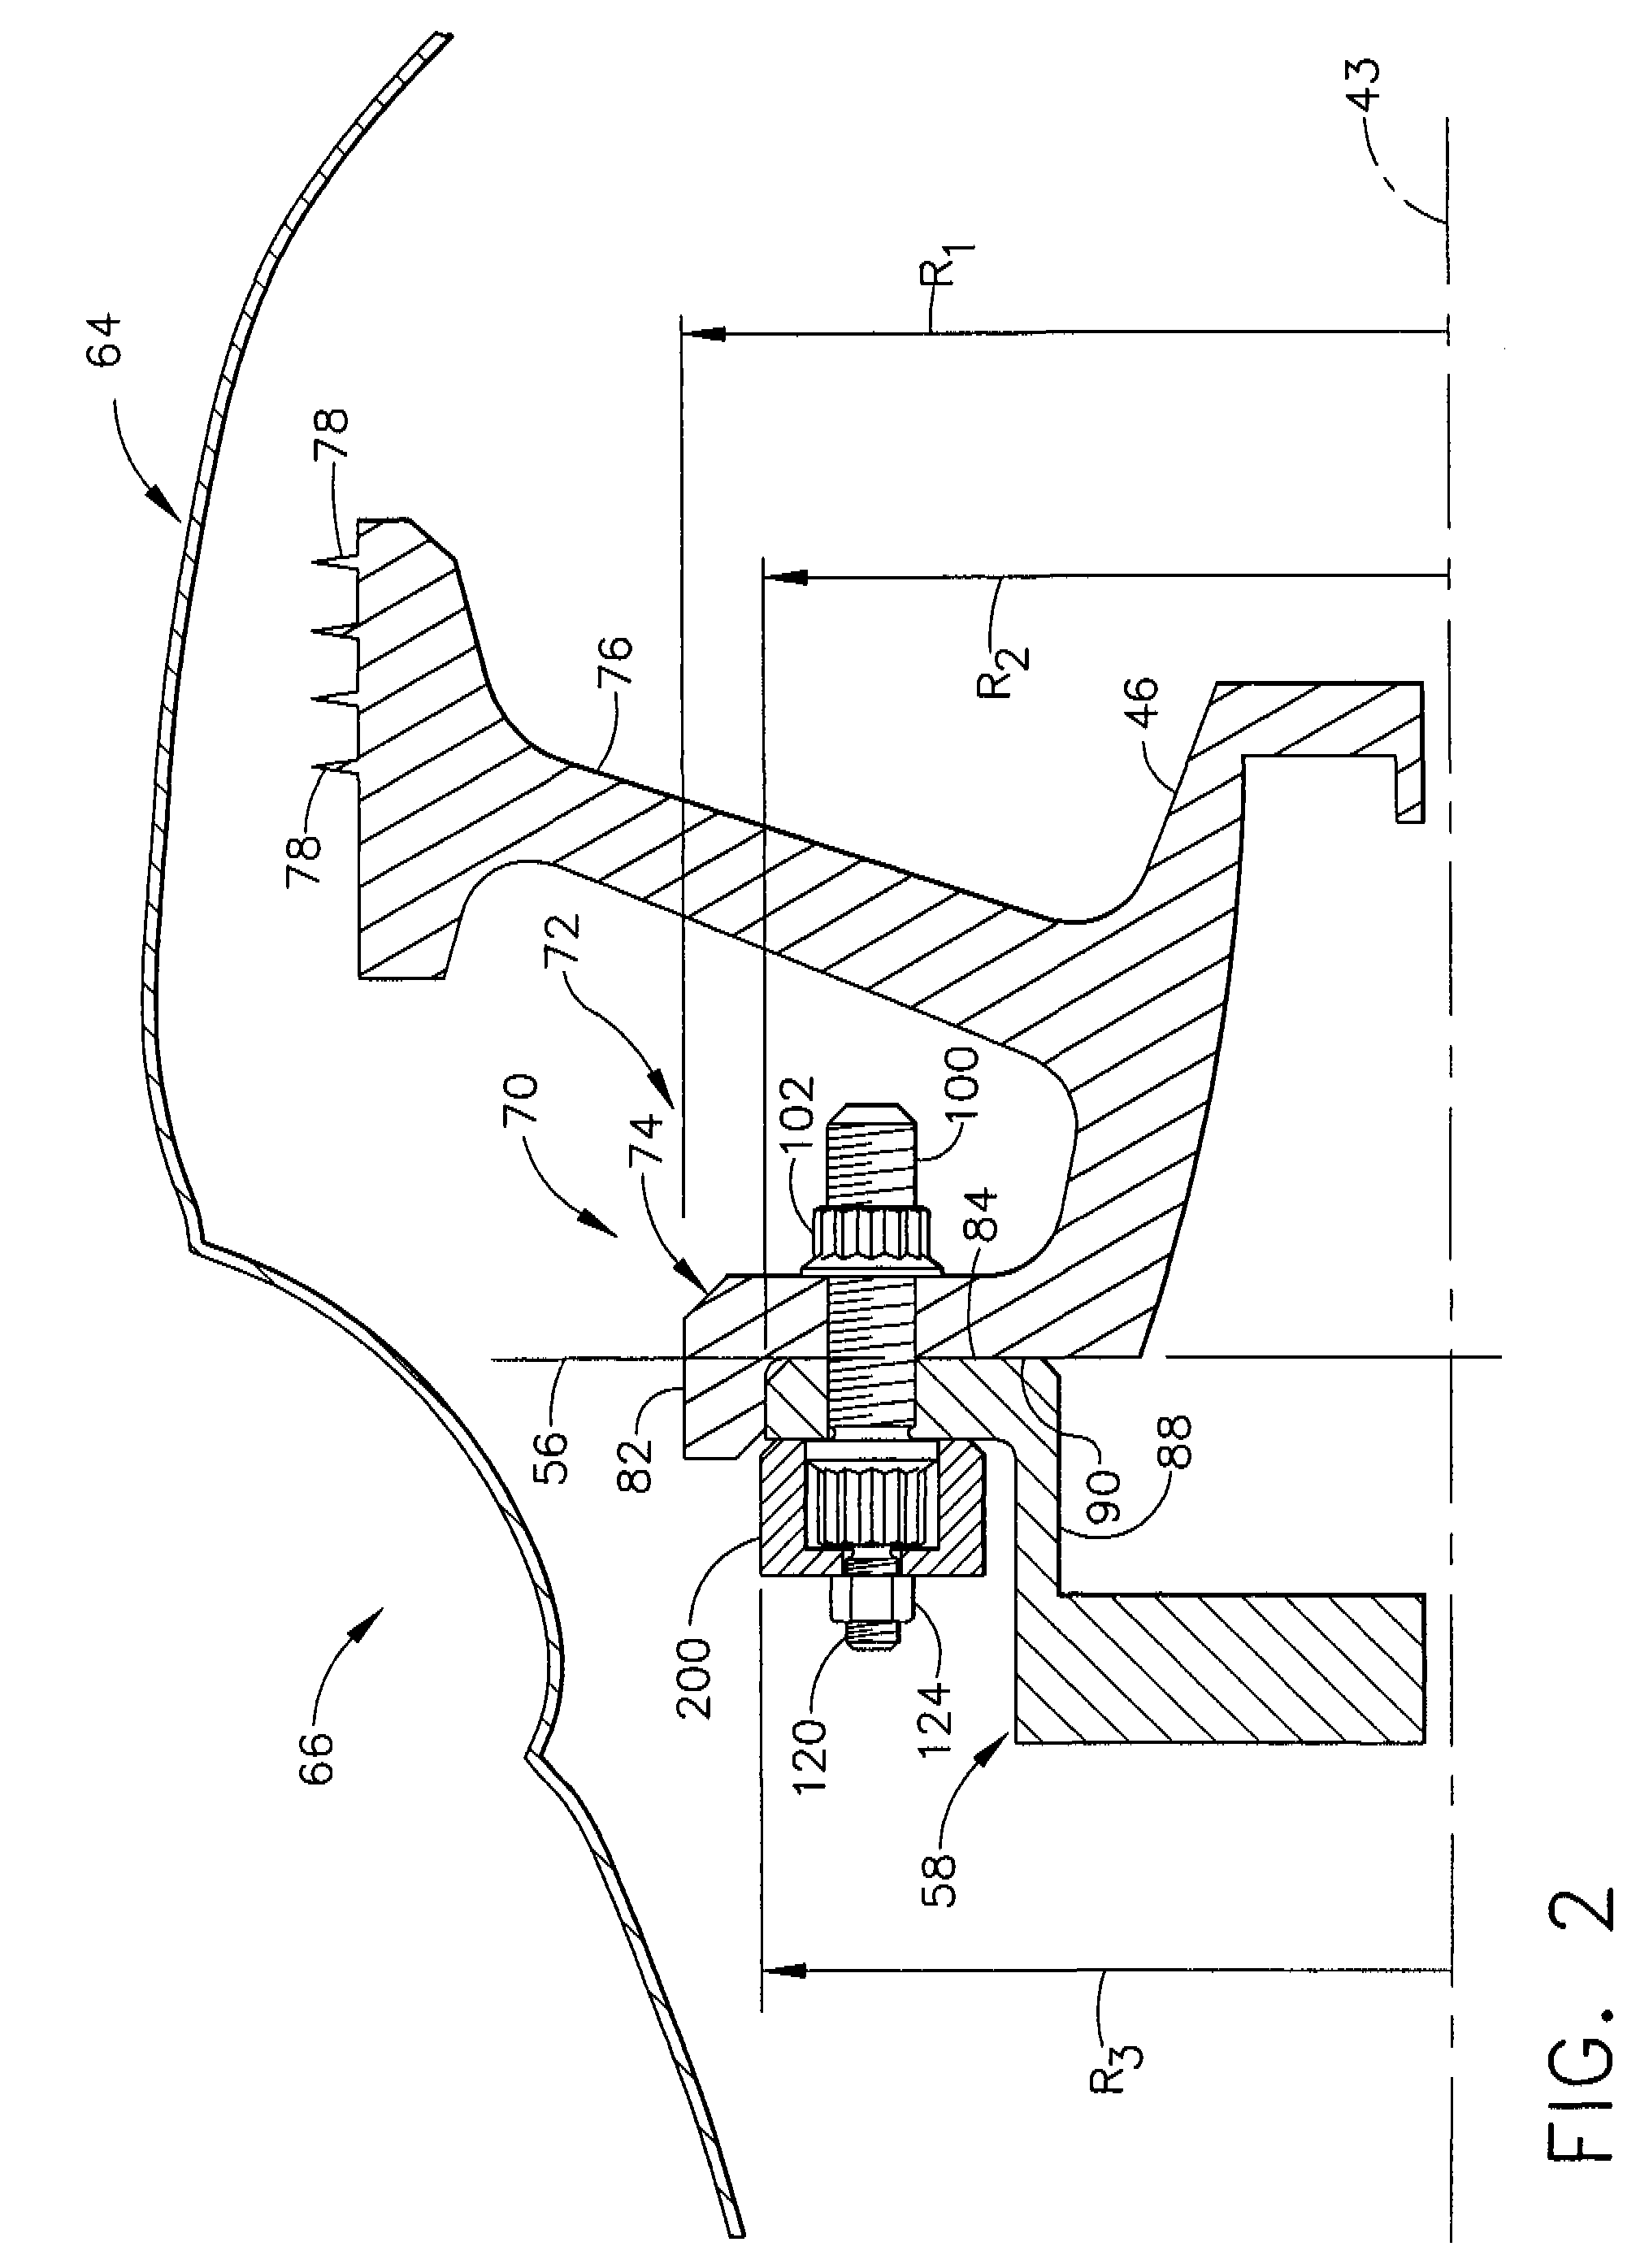 Method and apparatus for balancing gas turbine engines